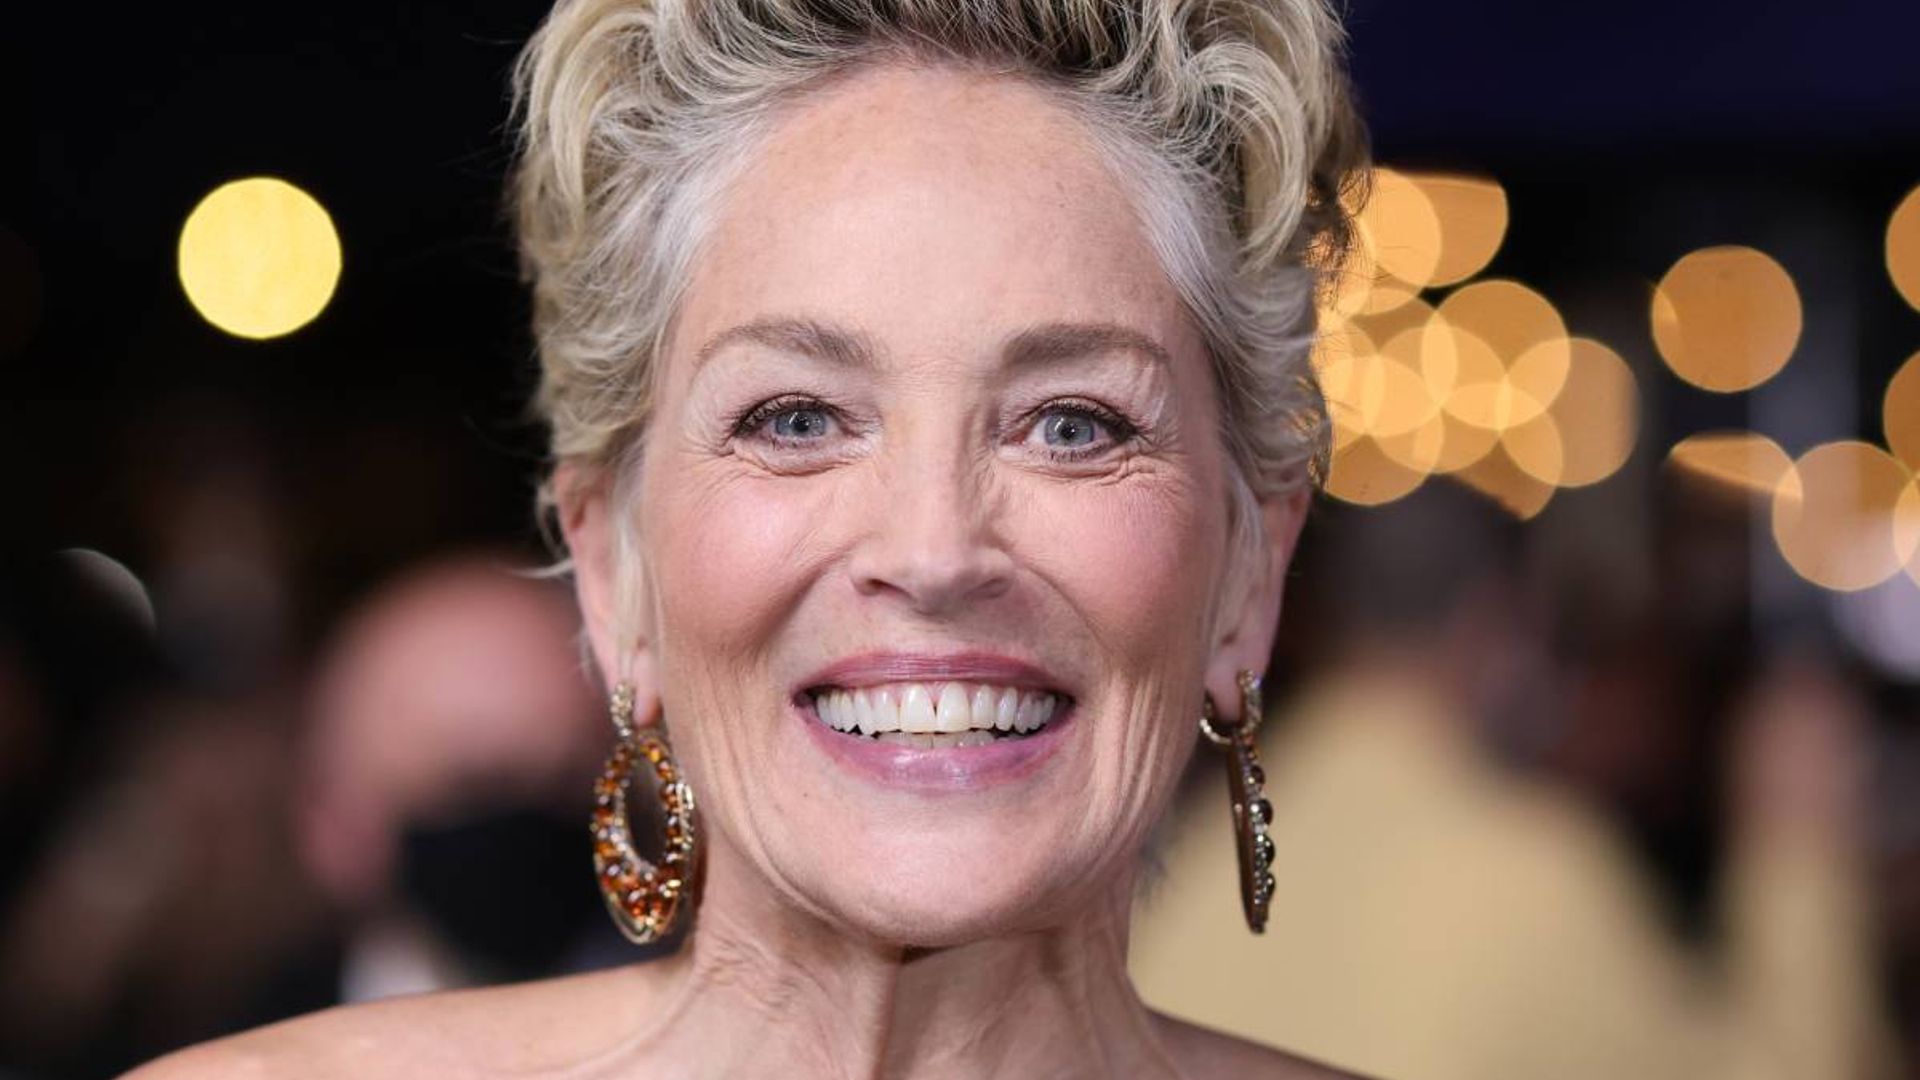 Sharon Stone showcases her natural beauty in jawdropping beach selfie